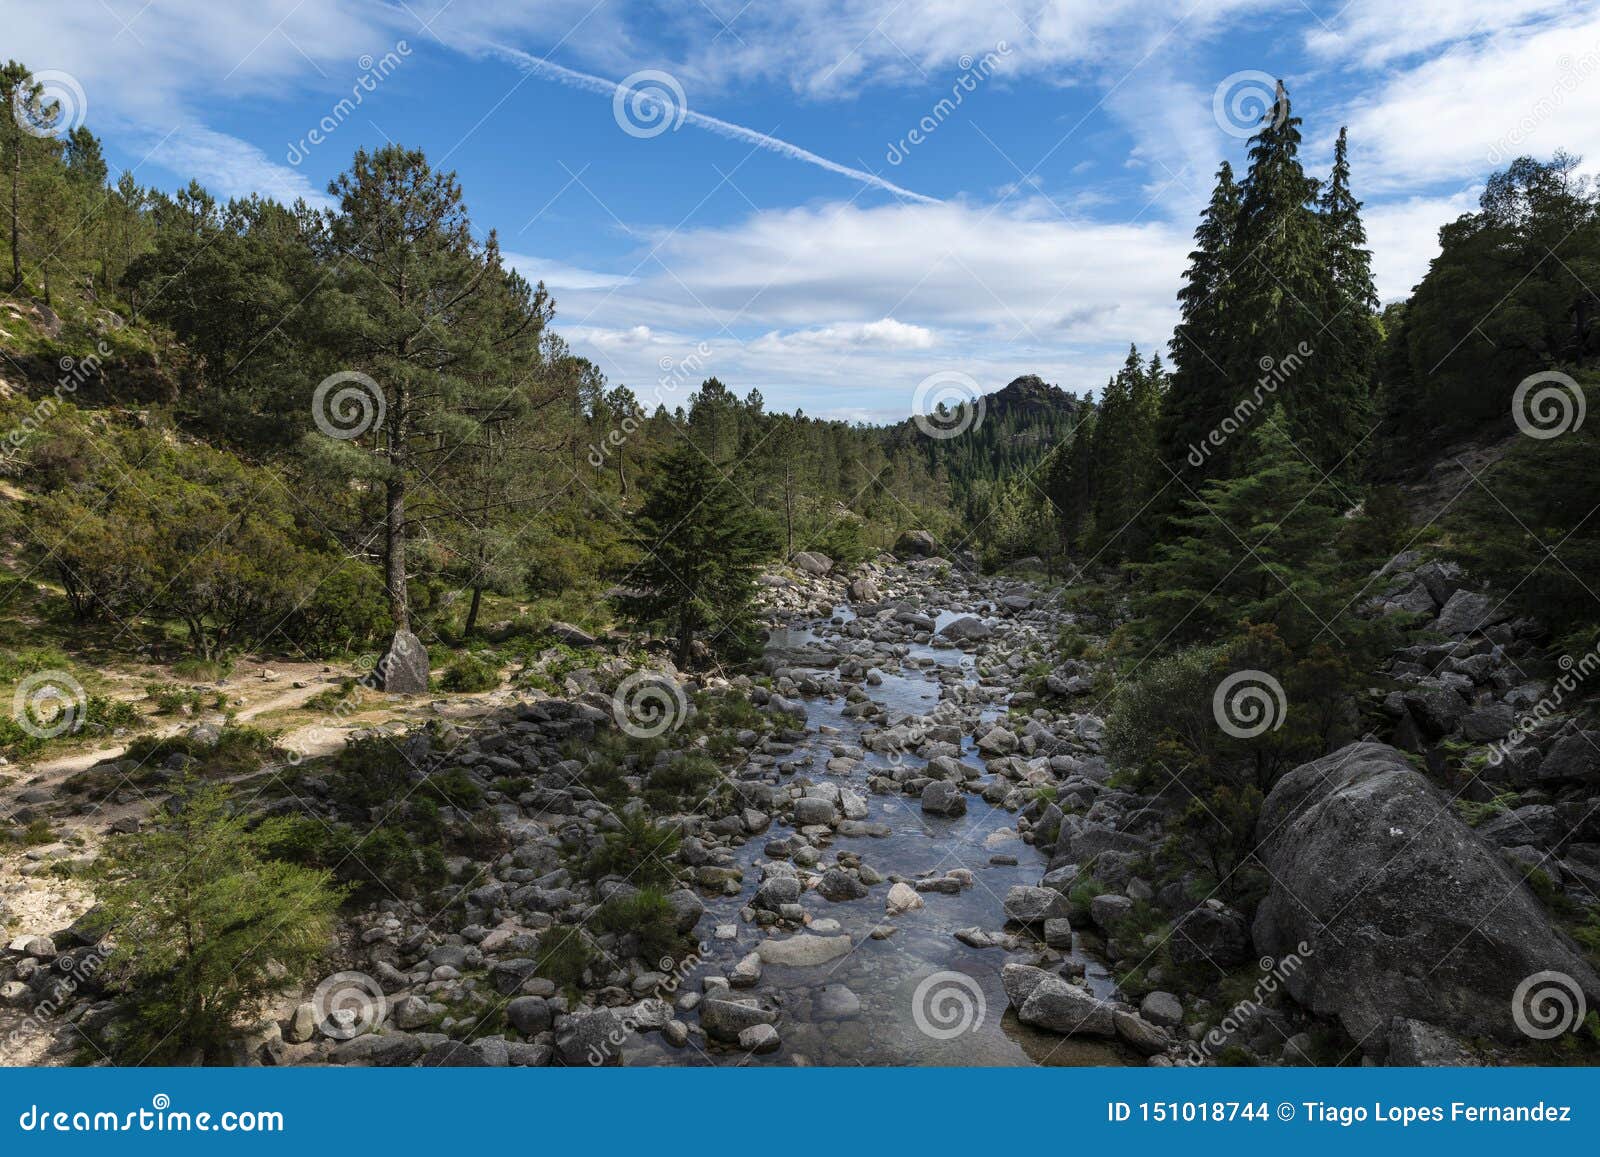 scenic view of the arado river at the peneda geres national park in northern portugal